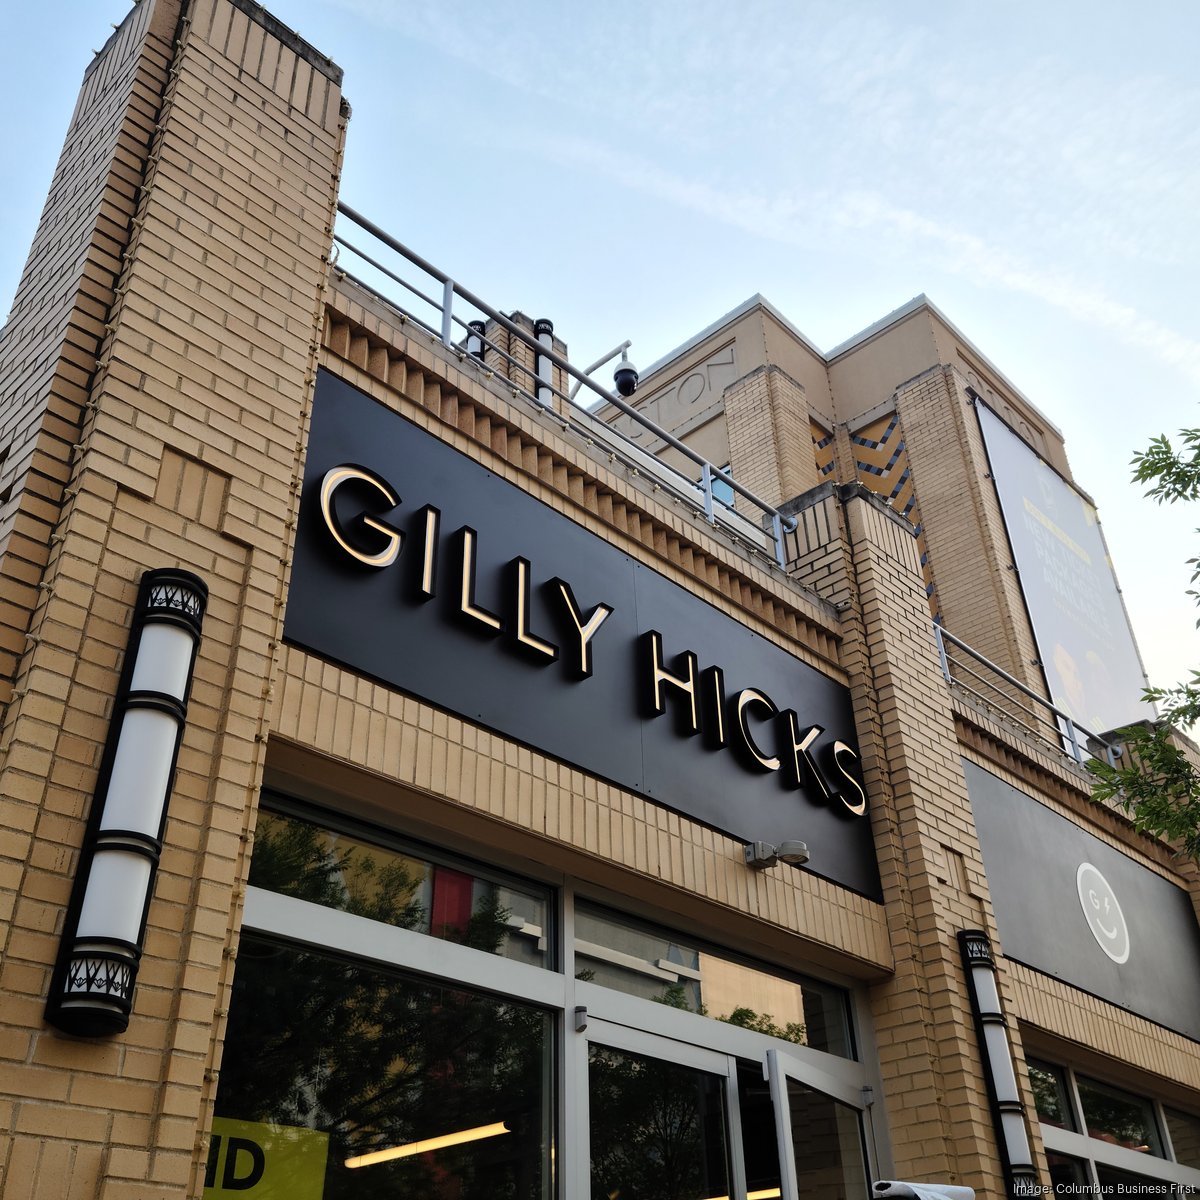 Hollister re-launches intimate brand Gilly Hicks